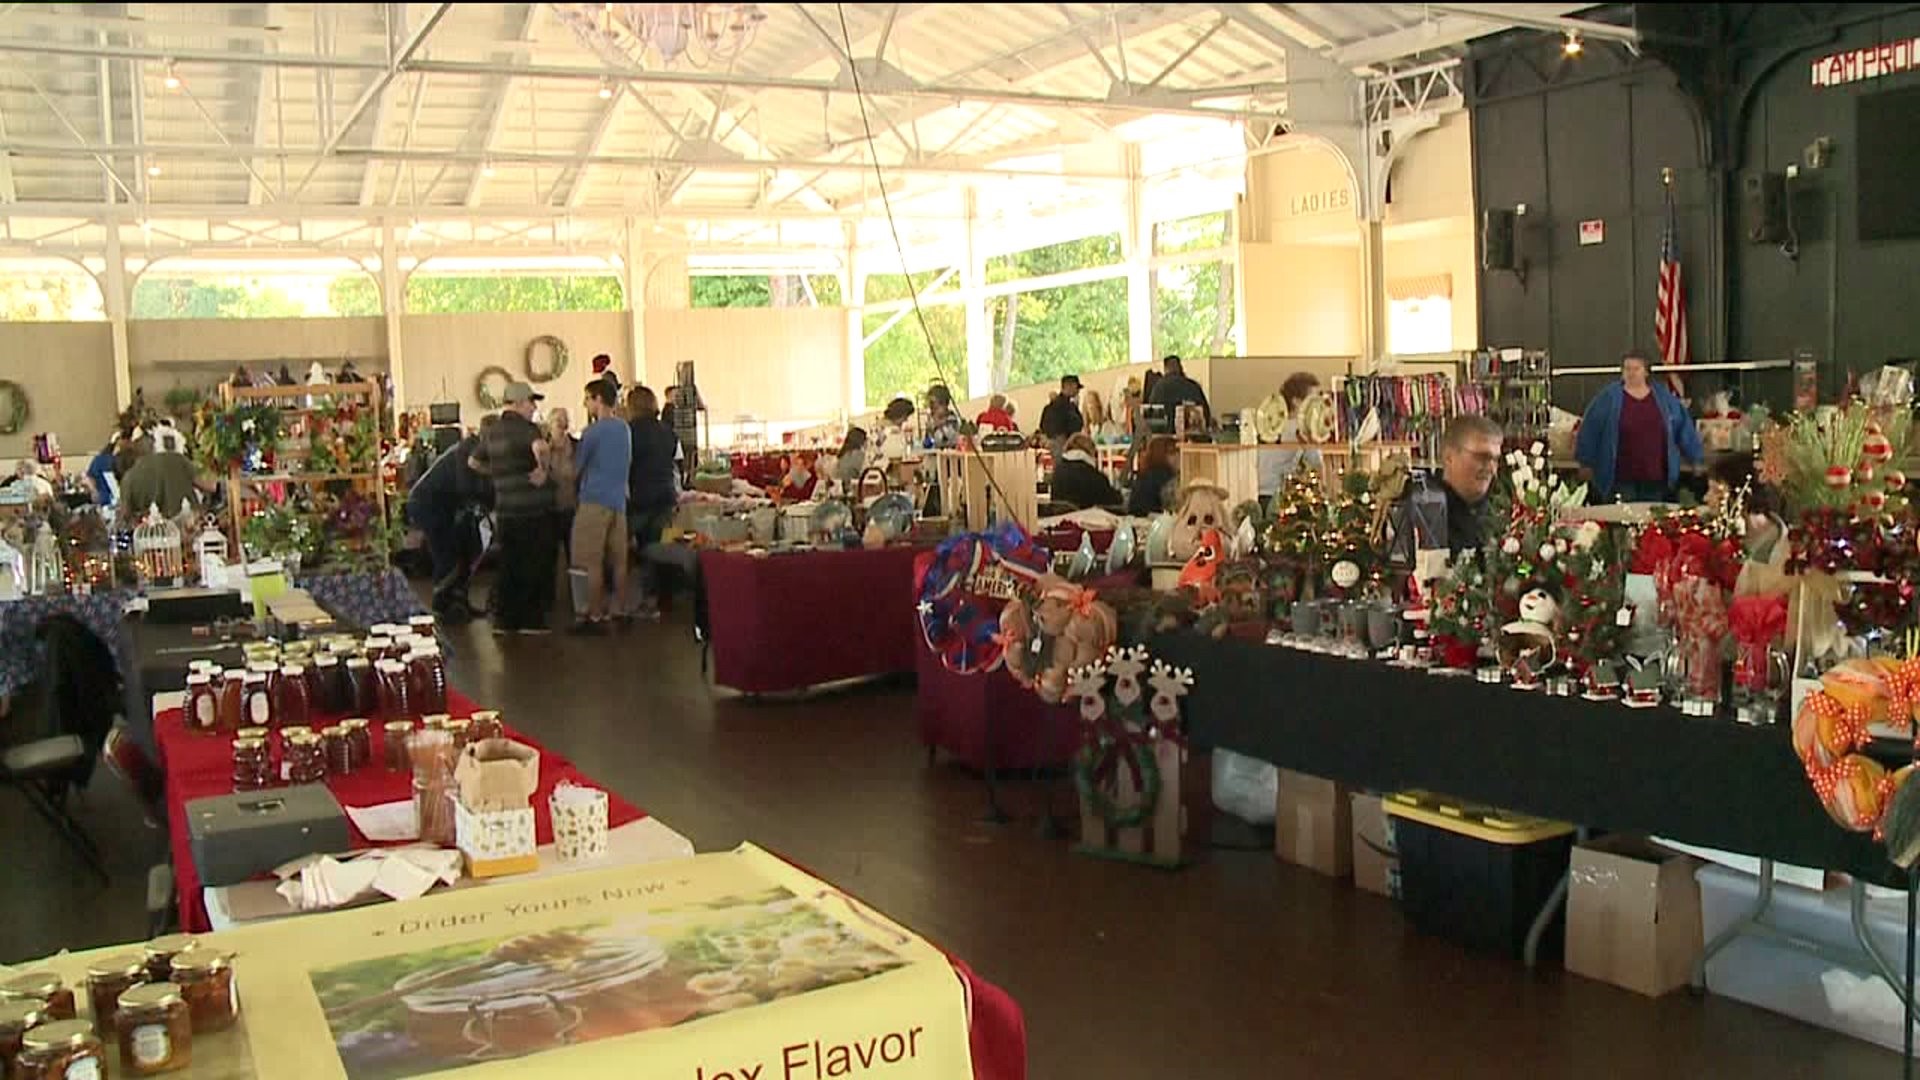 Craft Fair in Luzerne County Benefits Shriners Hospitals